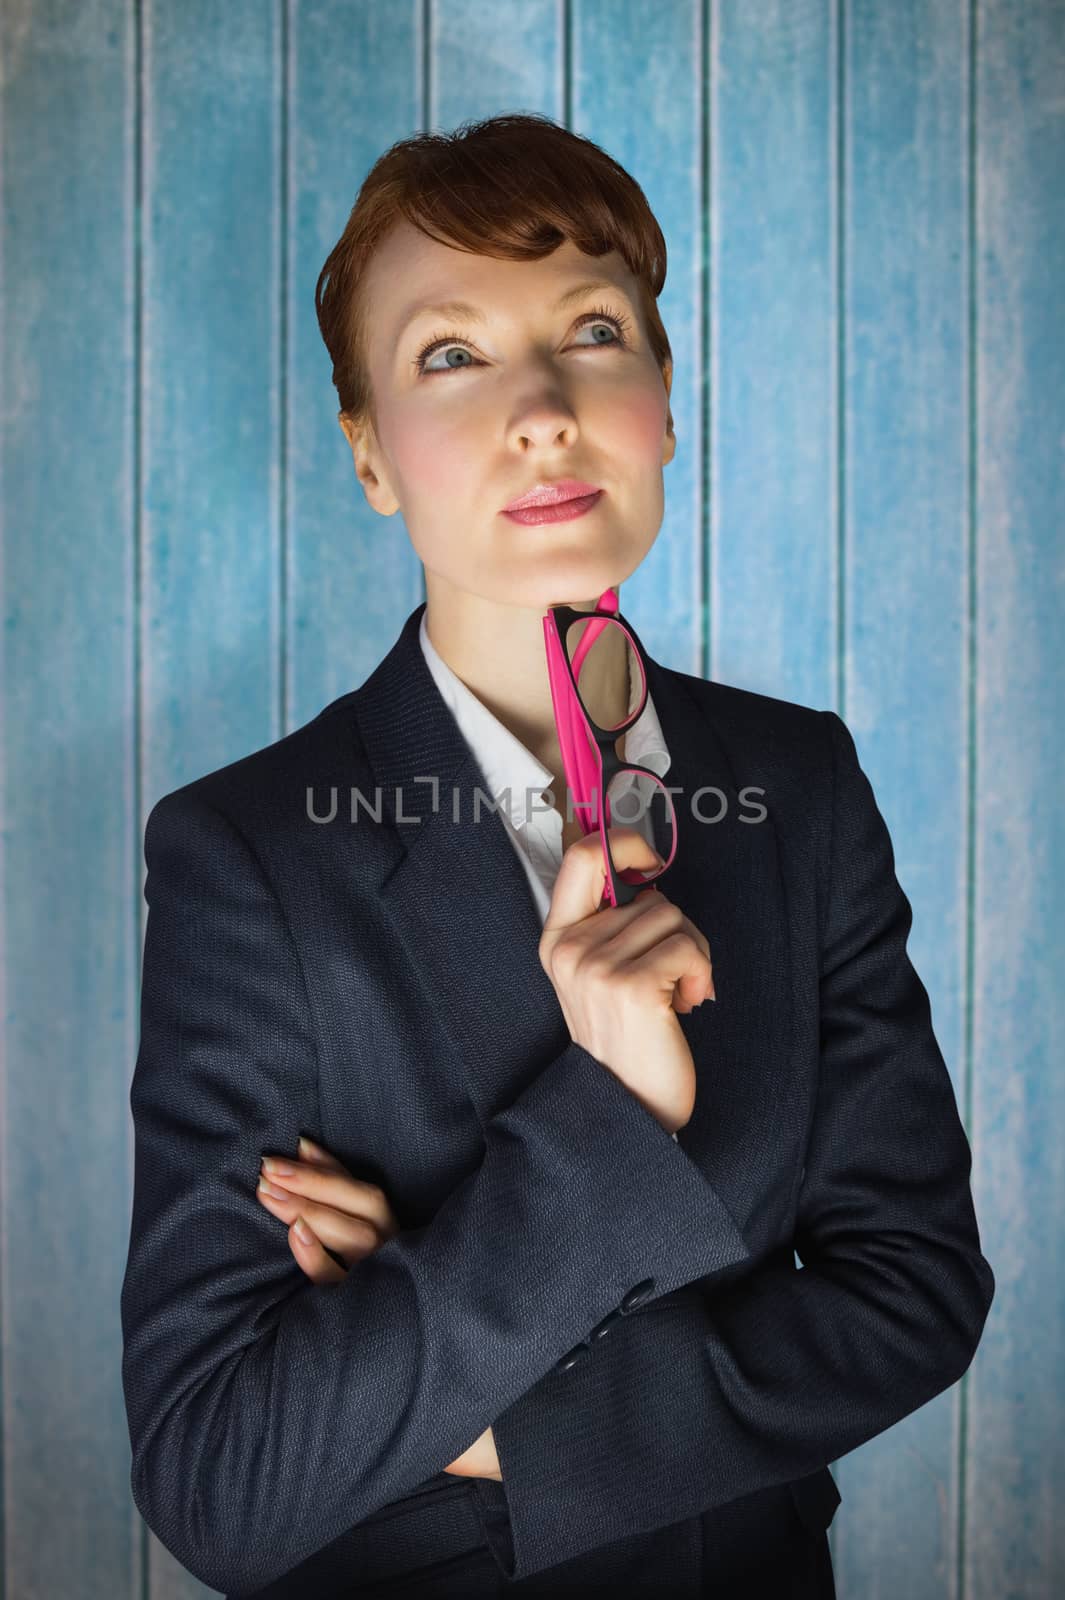 Thinking businesswoman against wooden planks